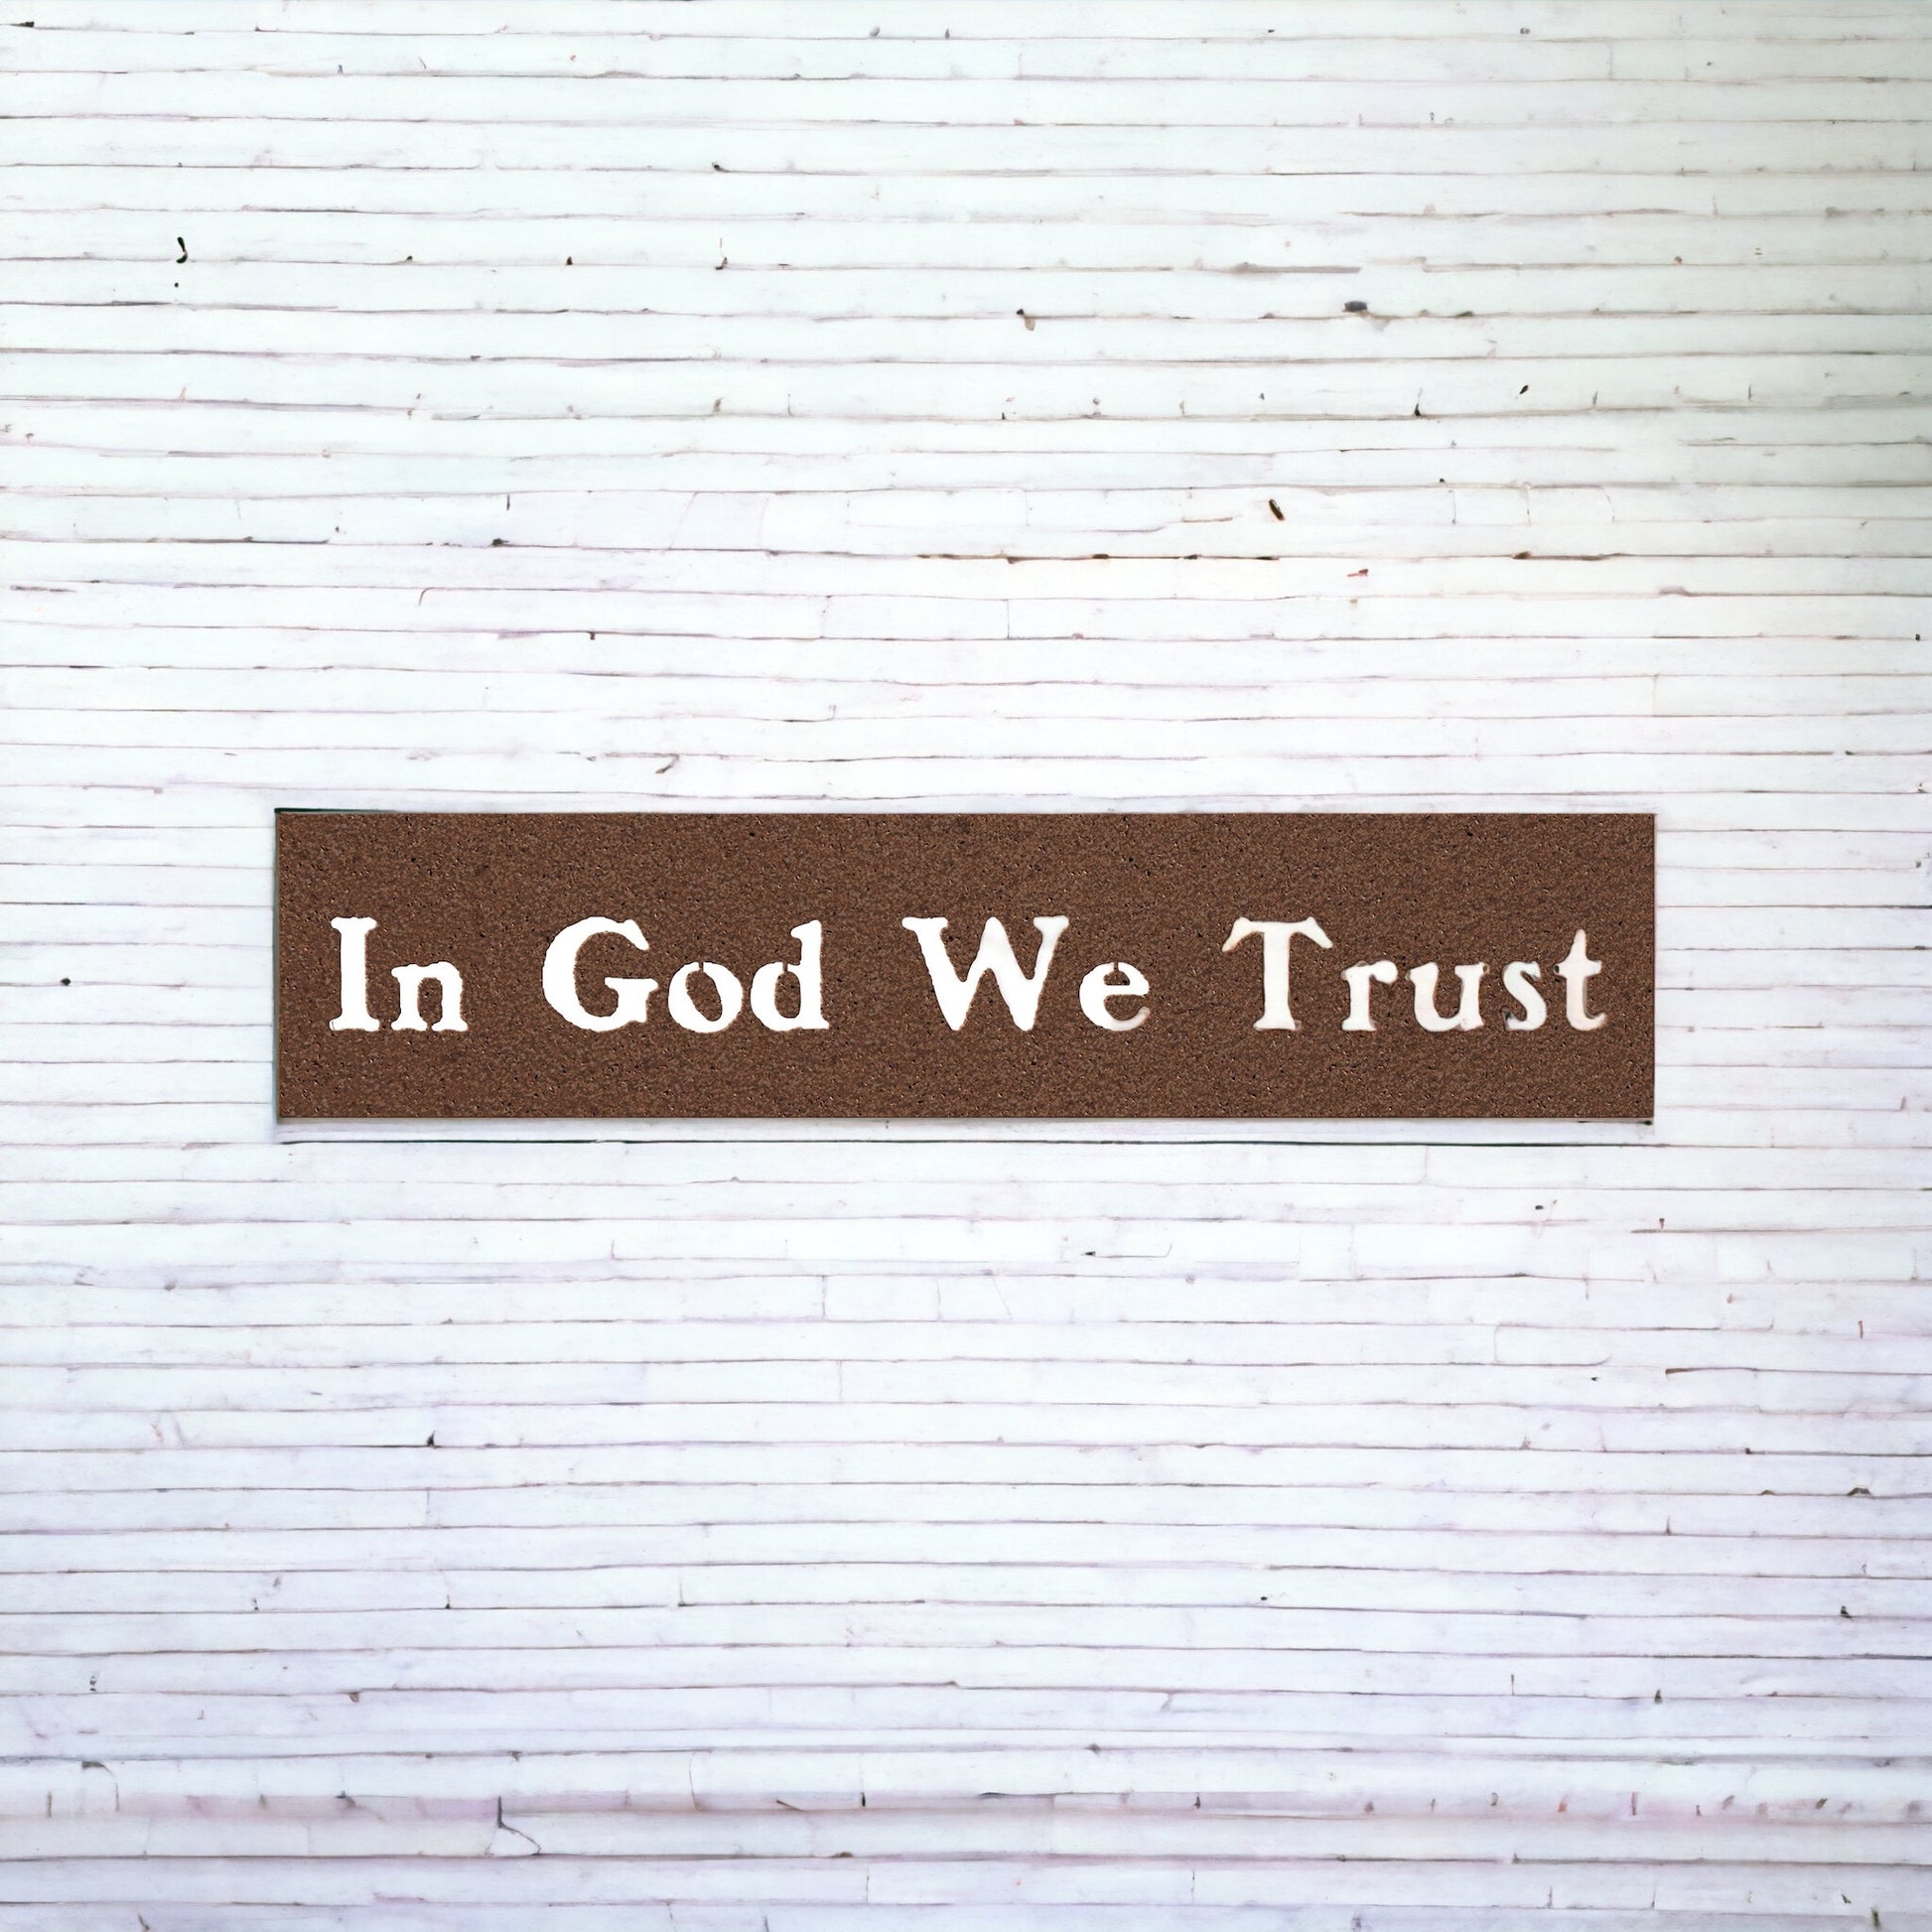 "In God We Trust" cut steel sign in various colors